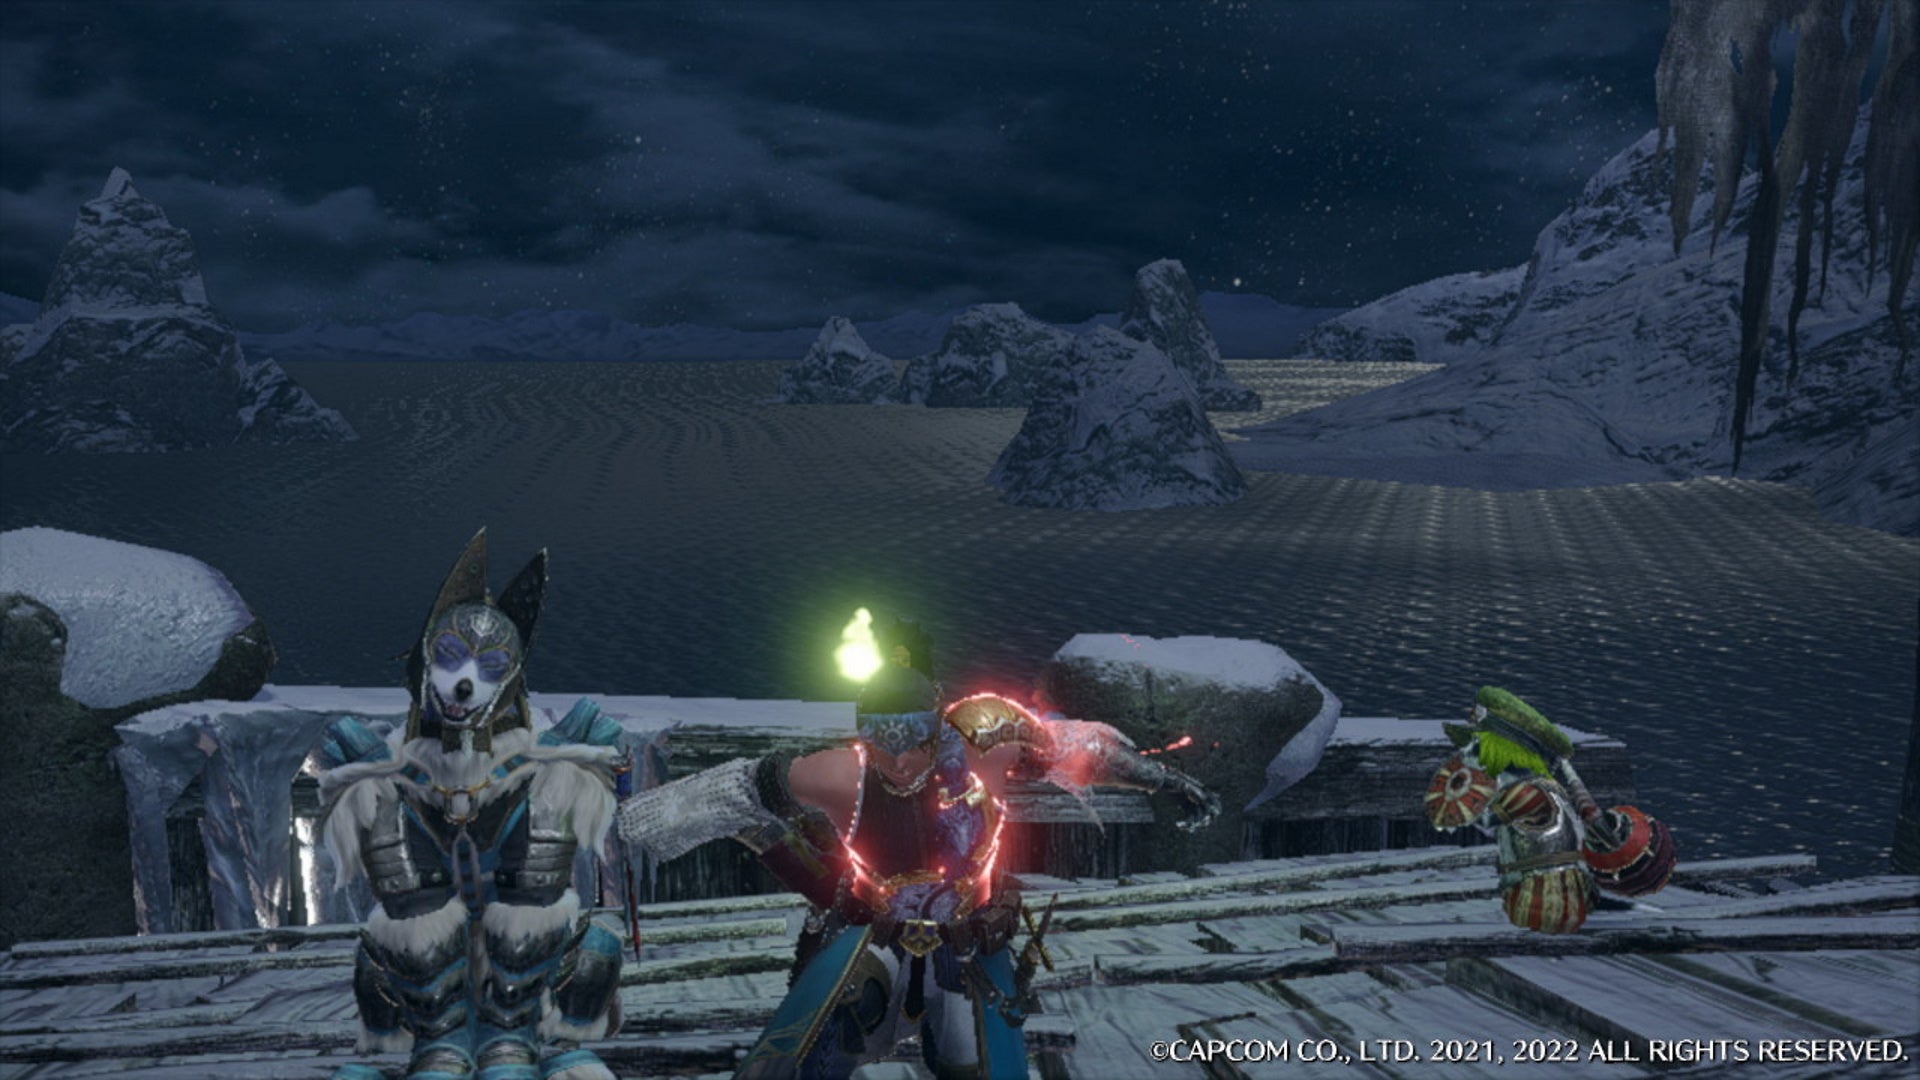 The ocean in Frost Islands as a Hunter, Palico, and Palamute wait for the Monksnail